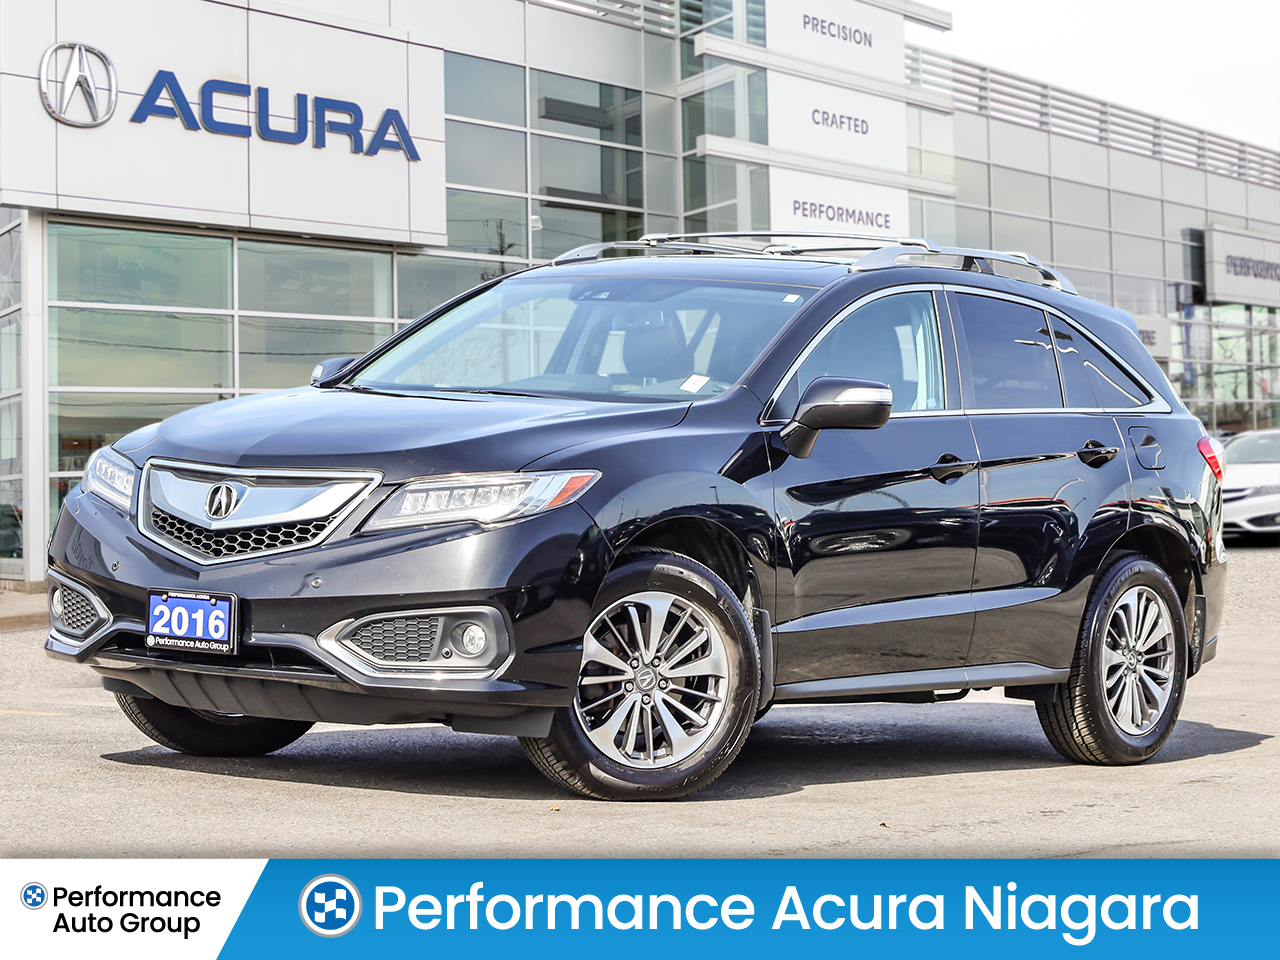 2016 Acura RDX SOLD - PENDING DELIVERY